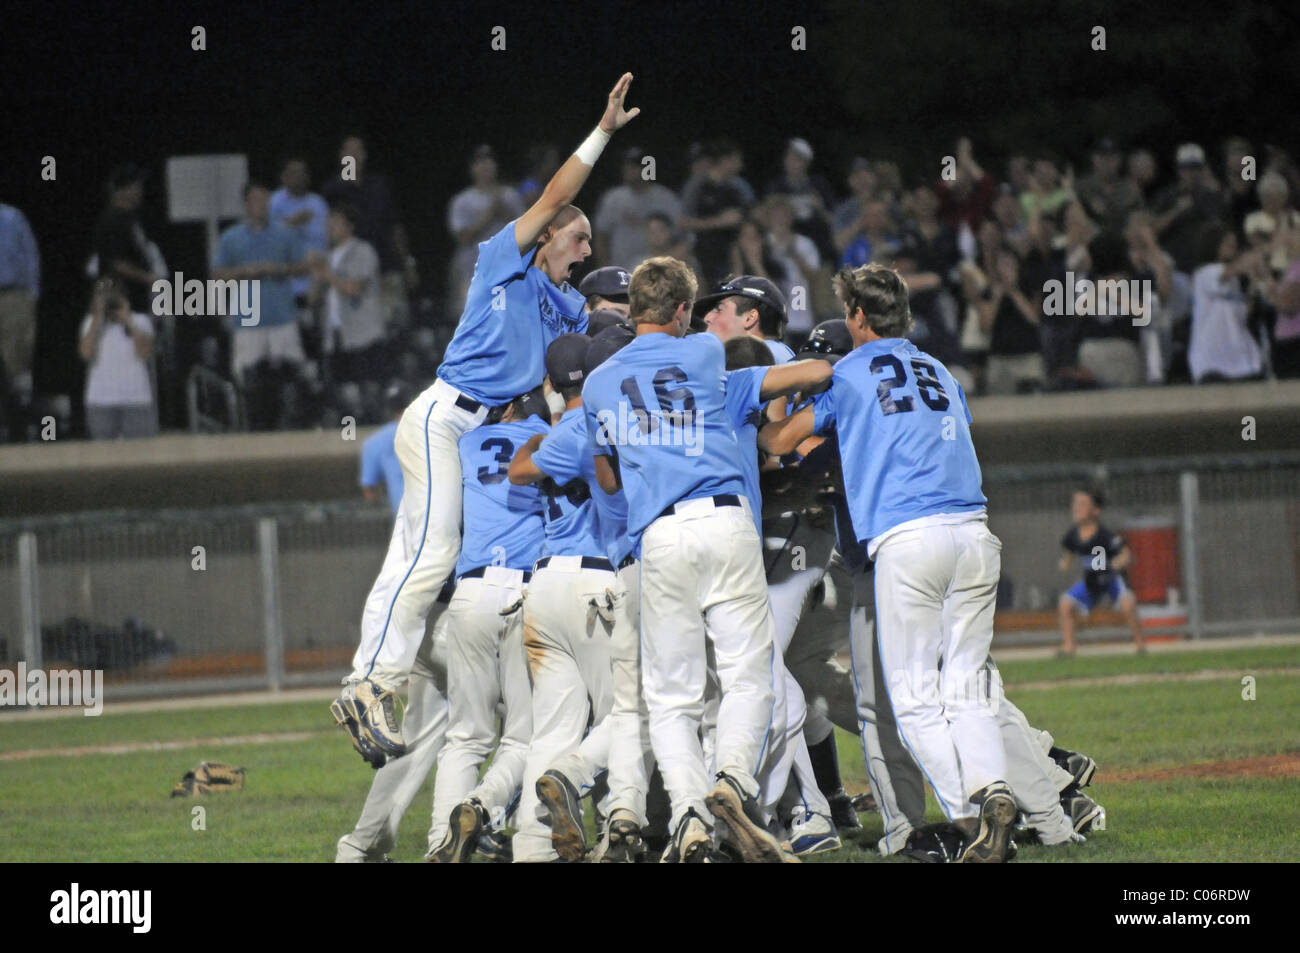 Team celebrates winning a state high school baseball championship immediately after the final out of the game. USA. Stock Photo